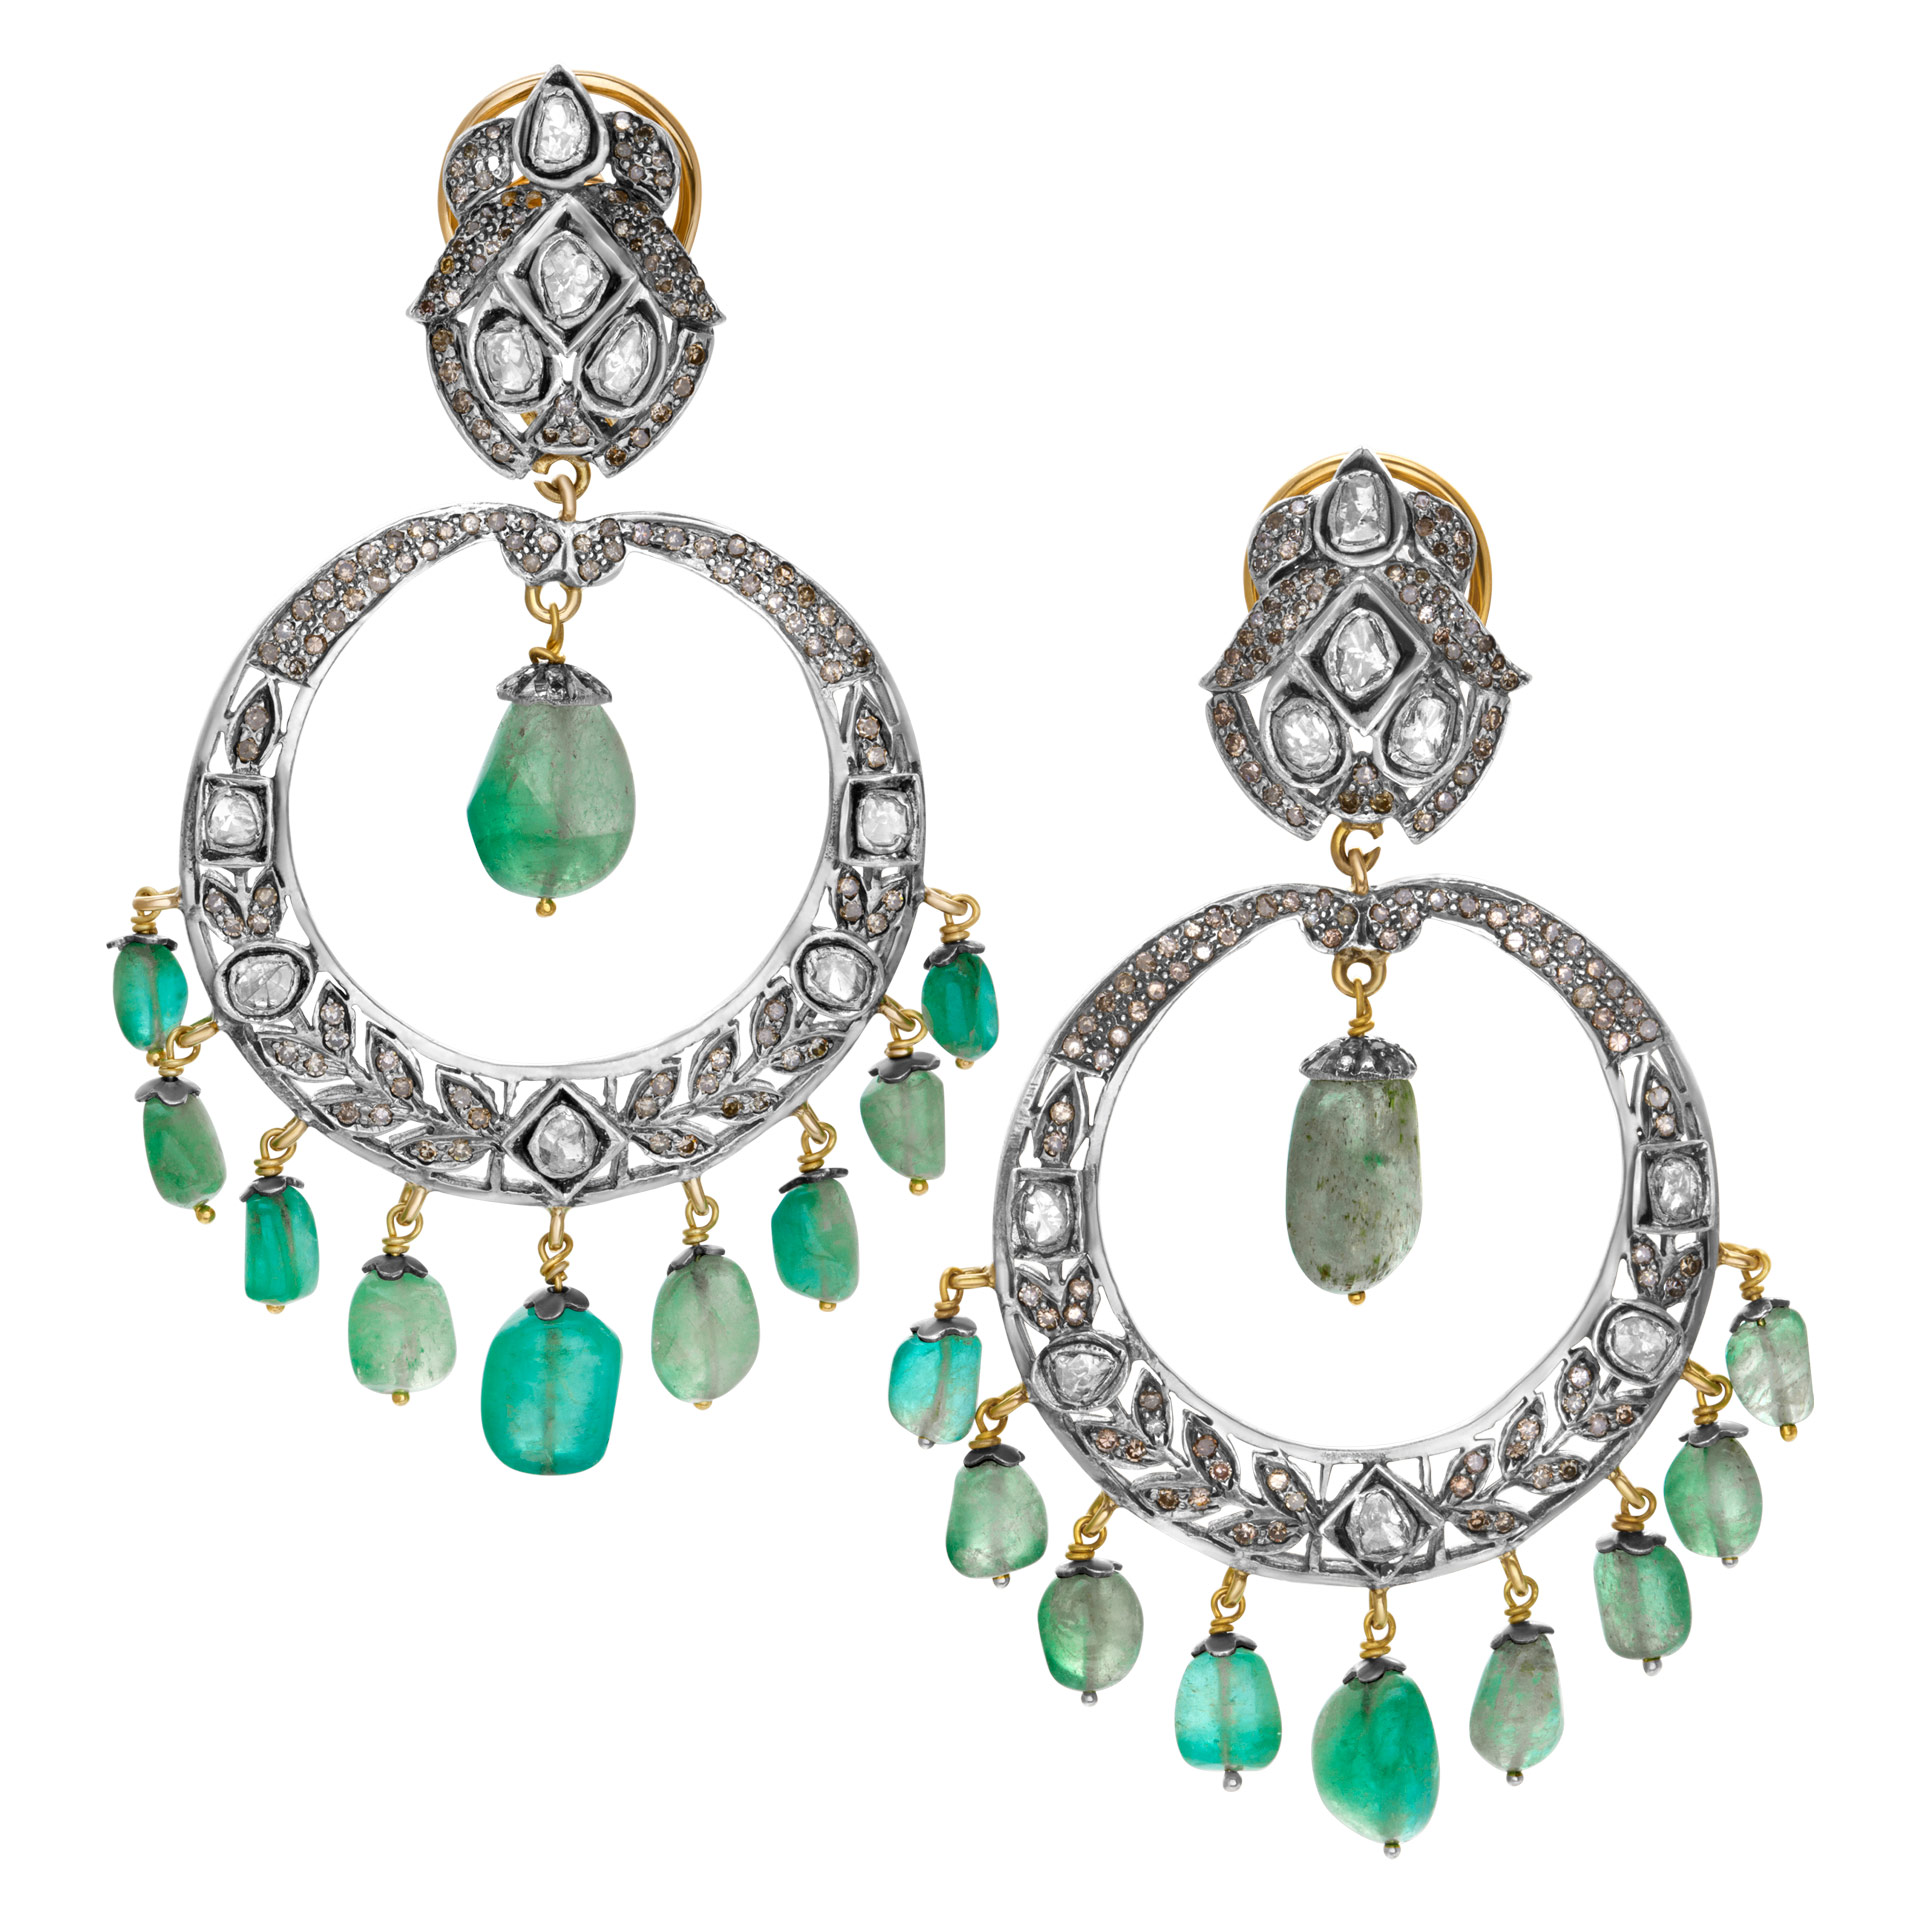 Boho style "Chandelier" earrings with light green emerald beads and over 5 carats rose cut diamonds, set in 14K gold nd sterling silver.